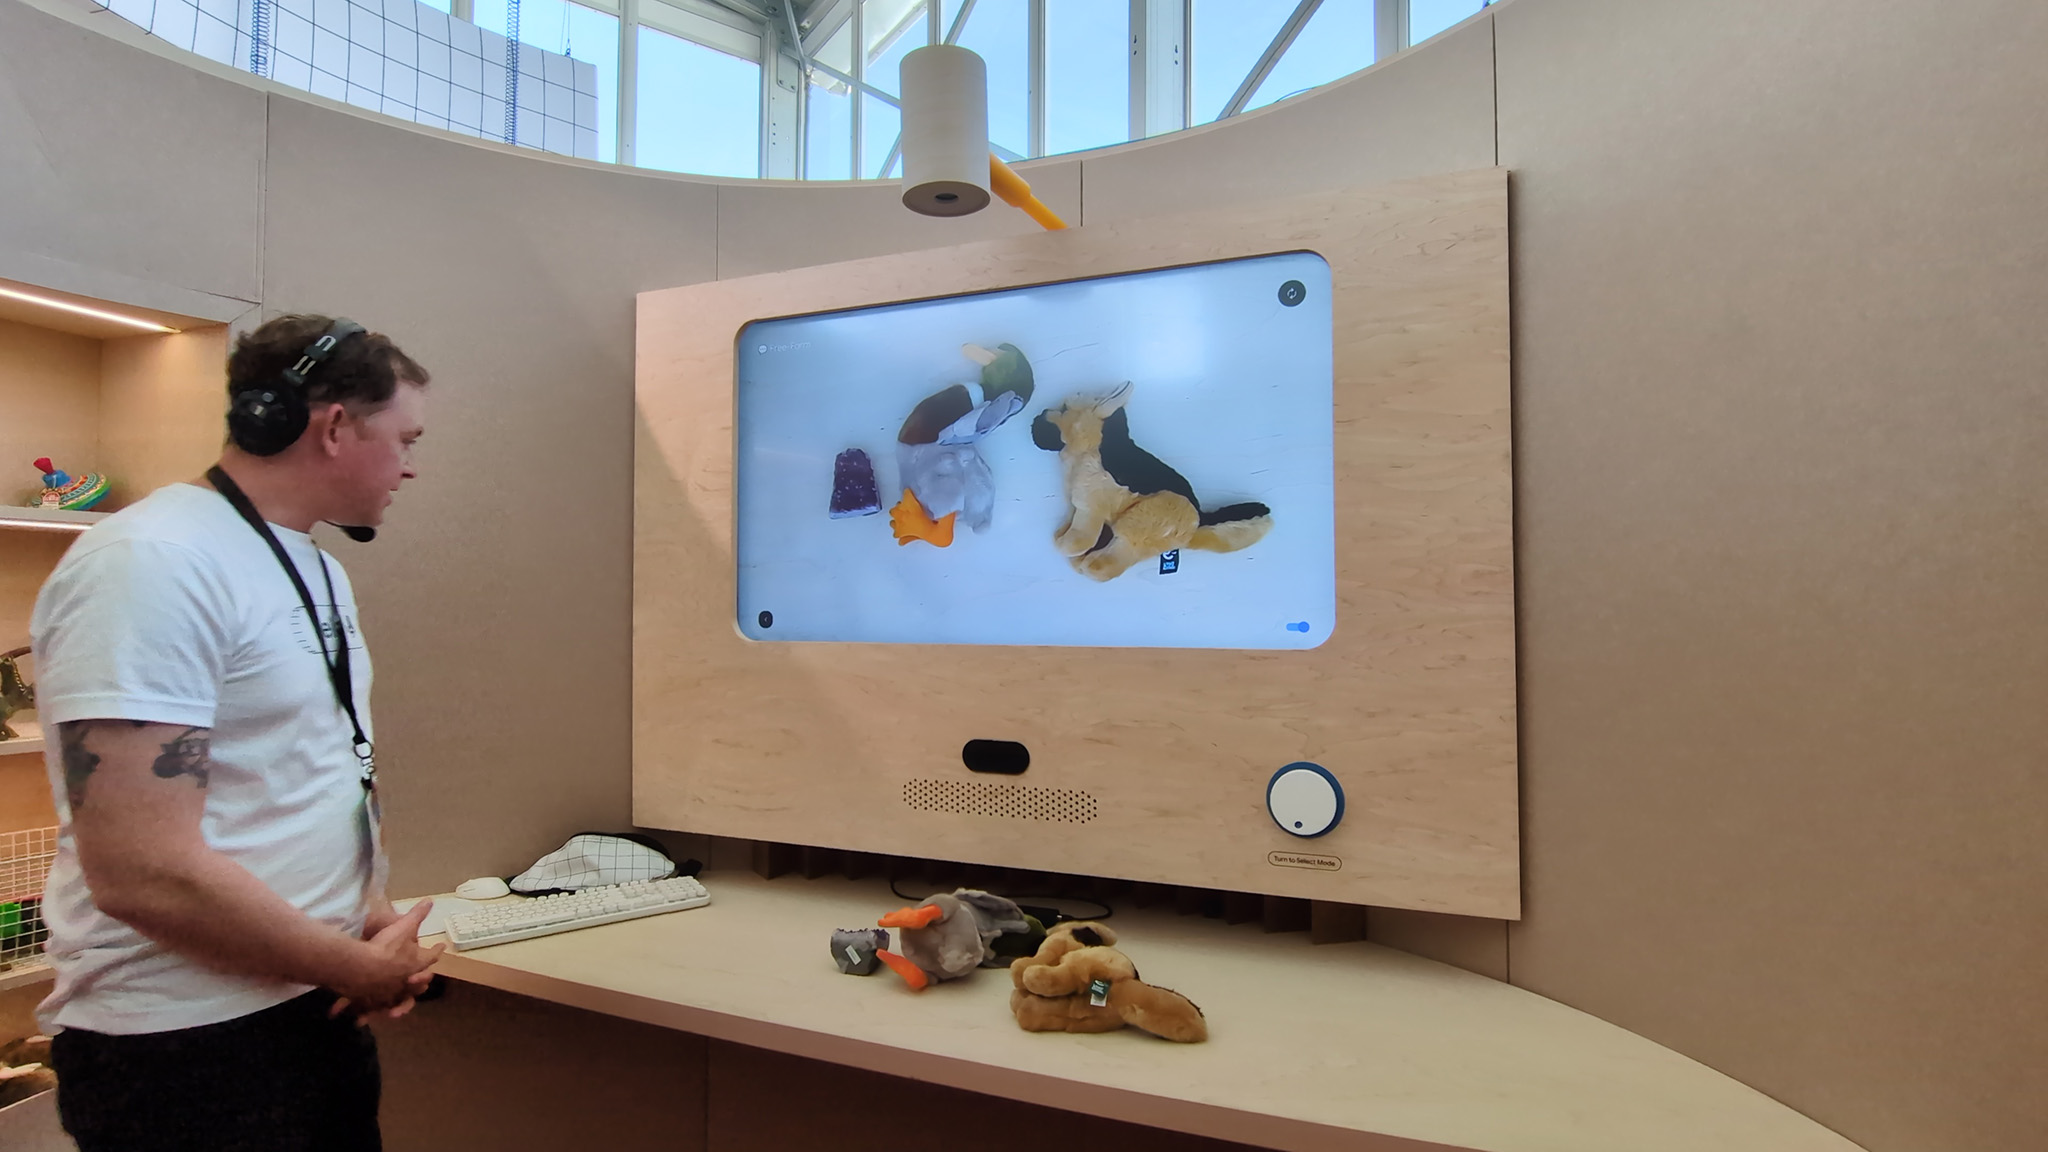 Demoing Google Project Astra's vision capabilities at Google I/O 2024